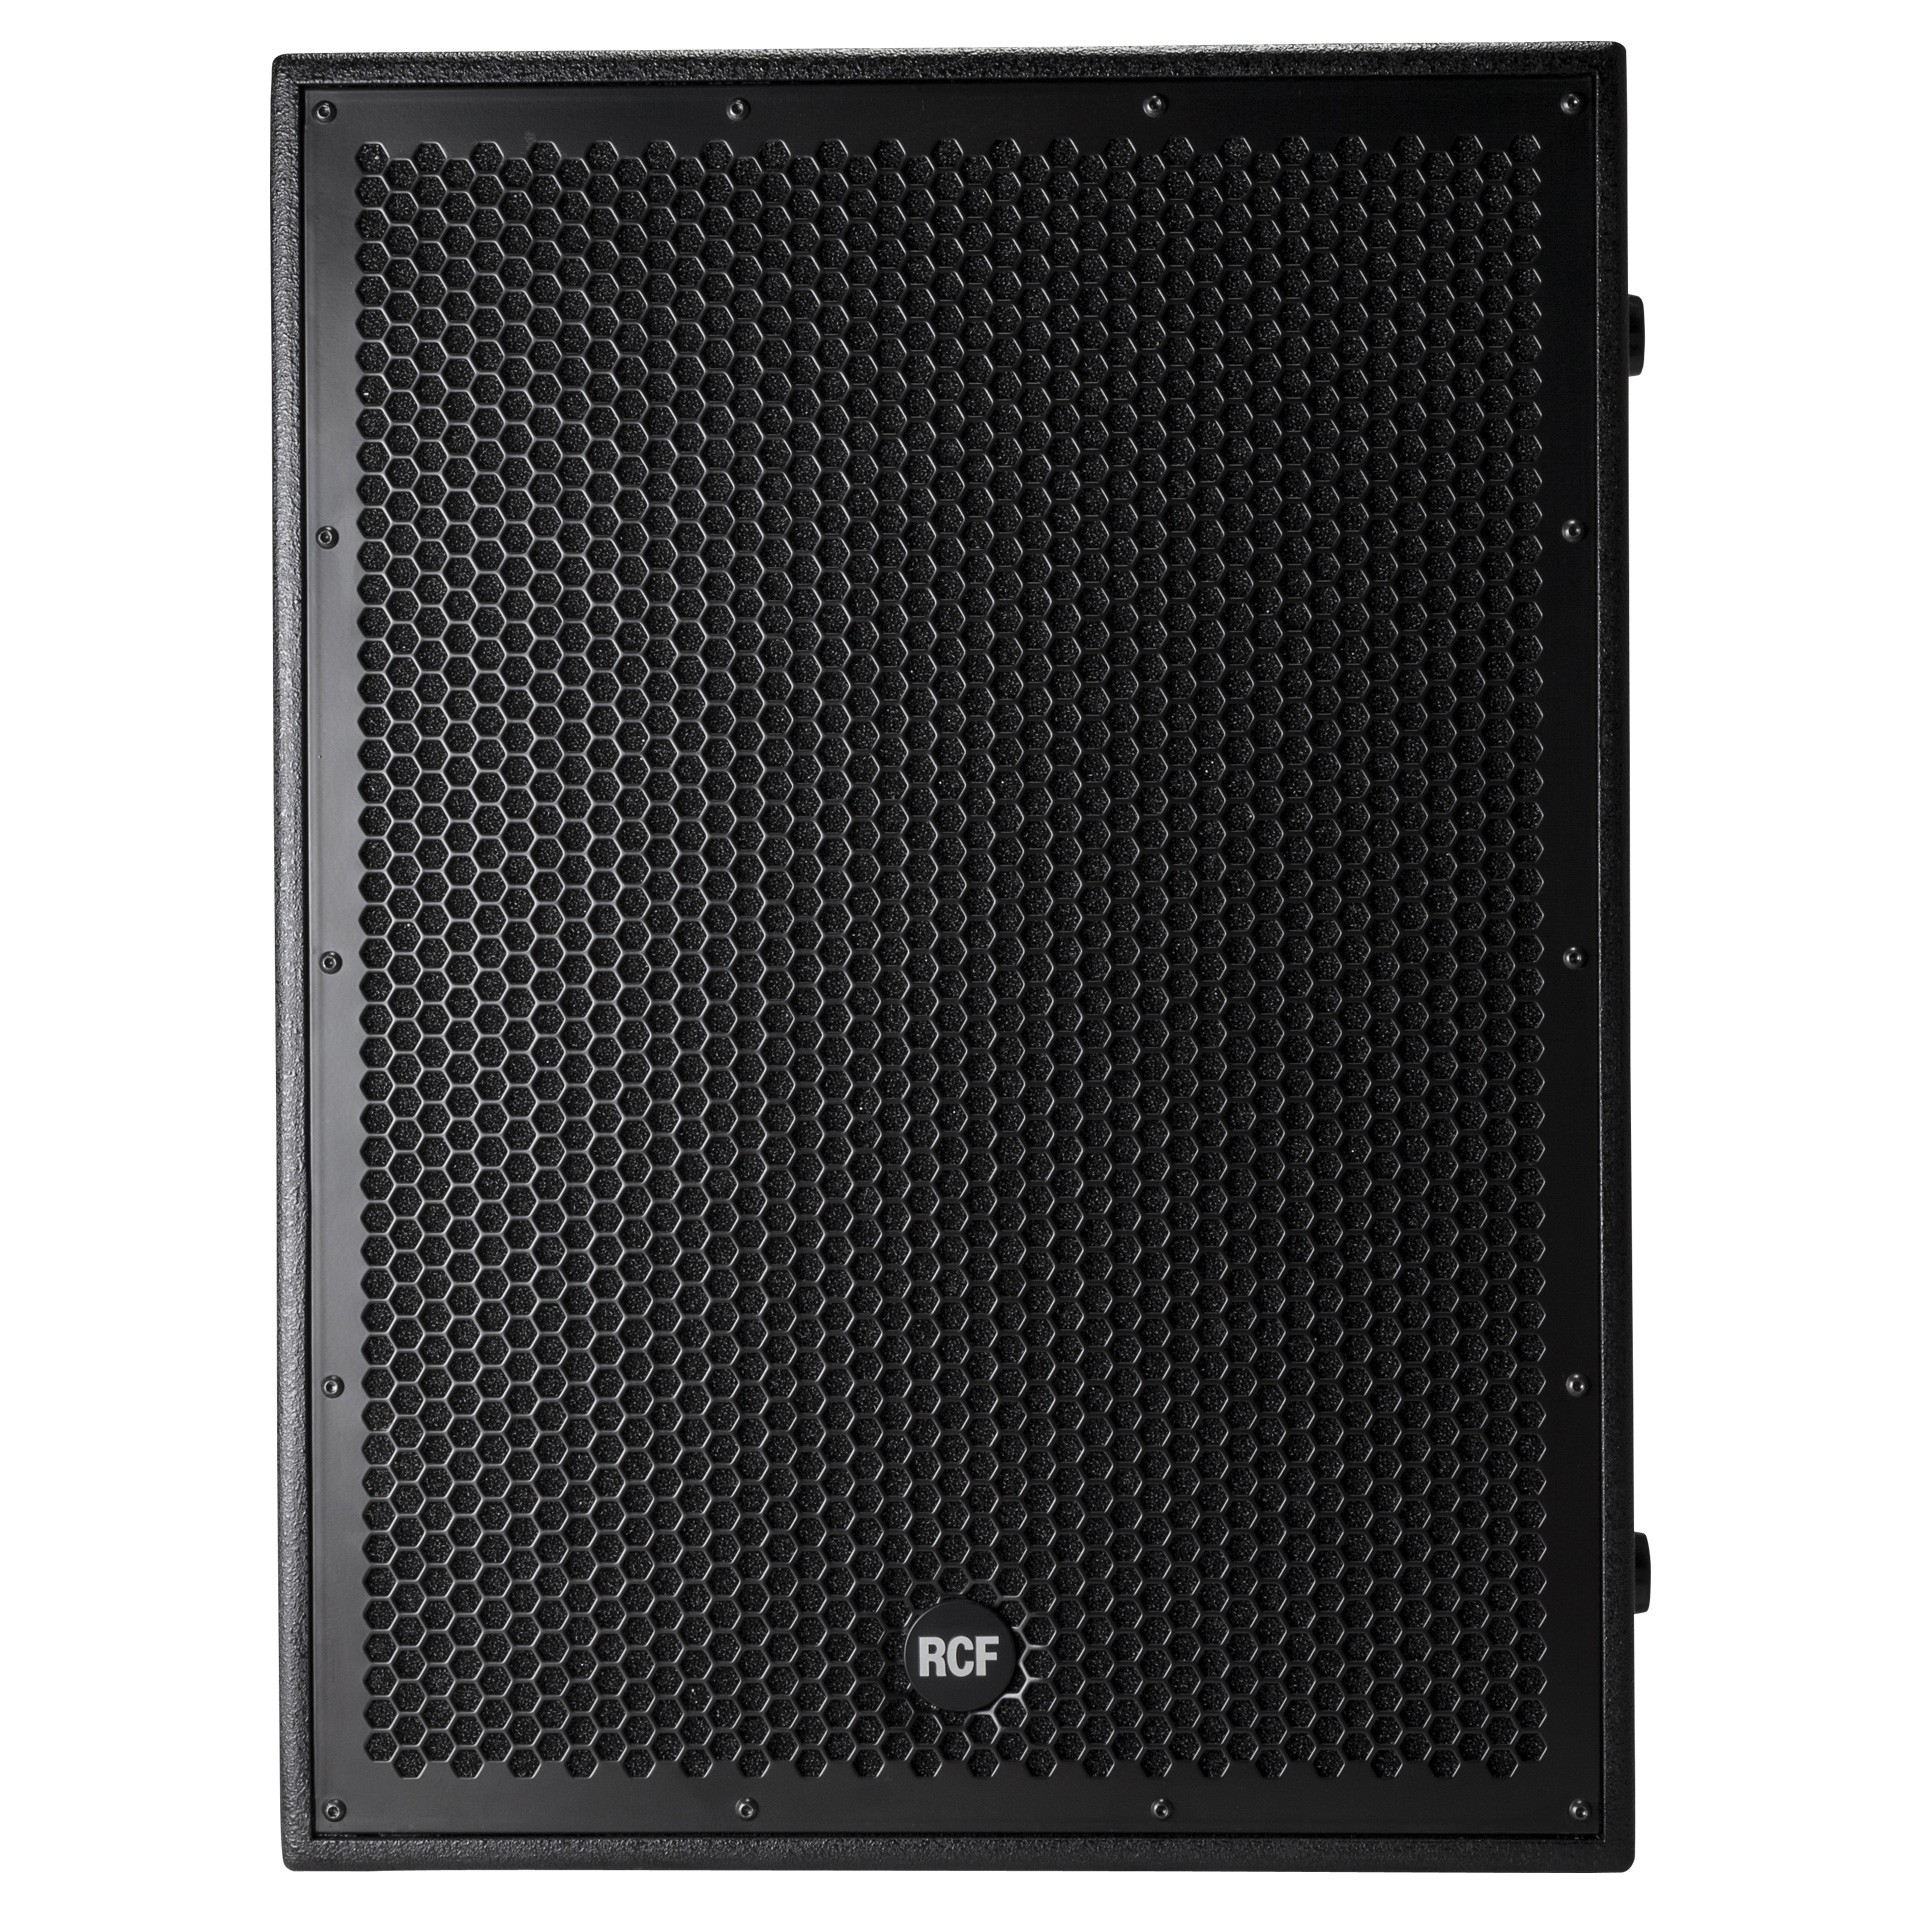 Subwoofere pro - Subwoofer activ RCF SUB 8005-AS, audioclub.ro